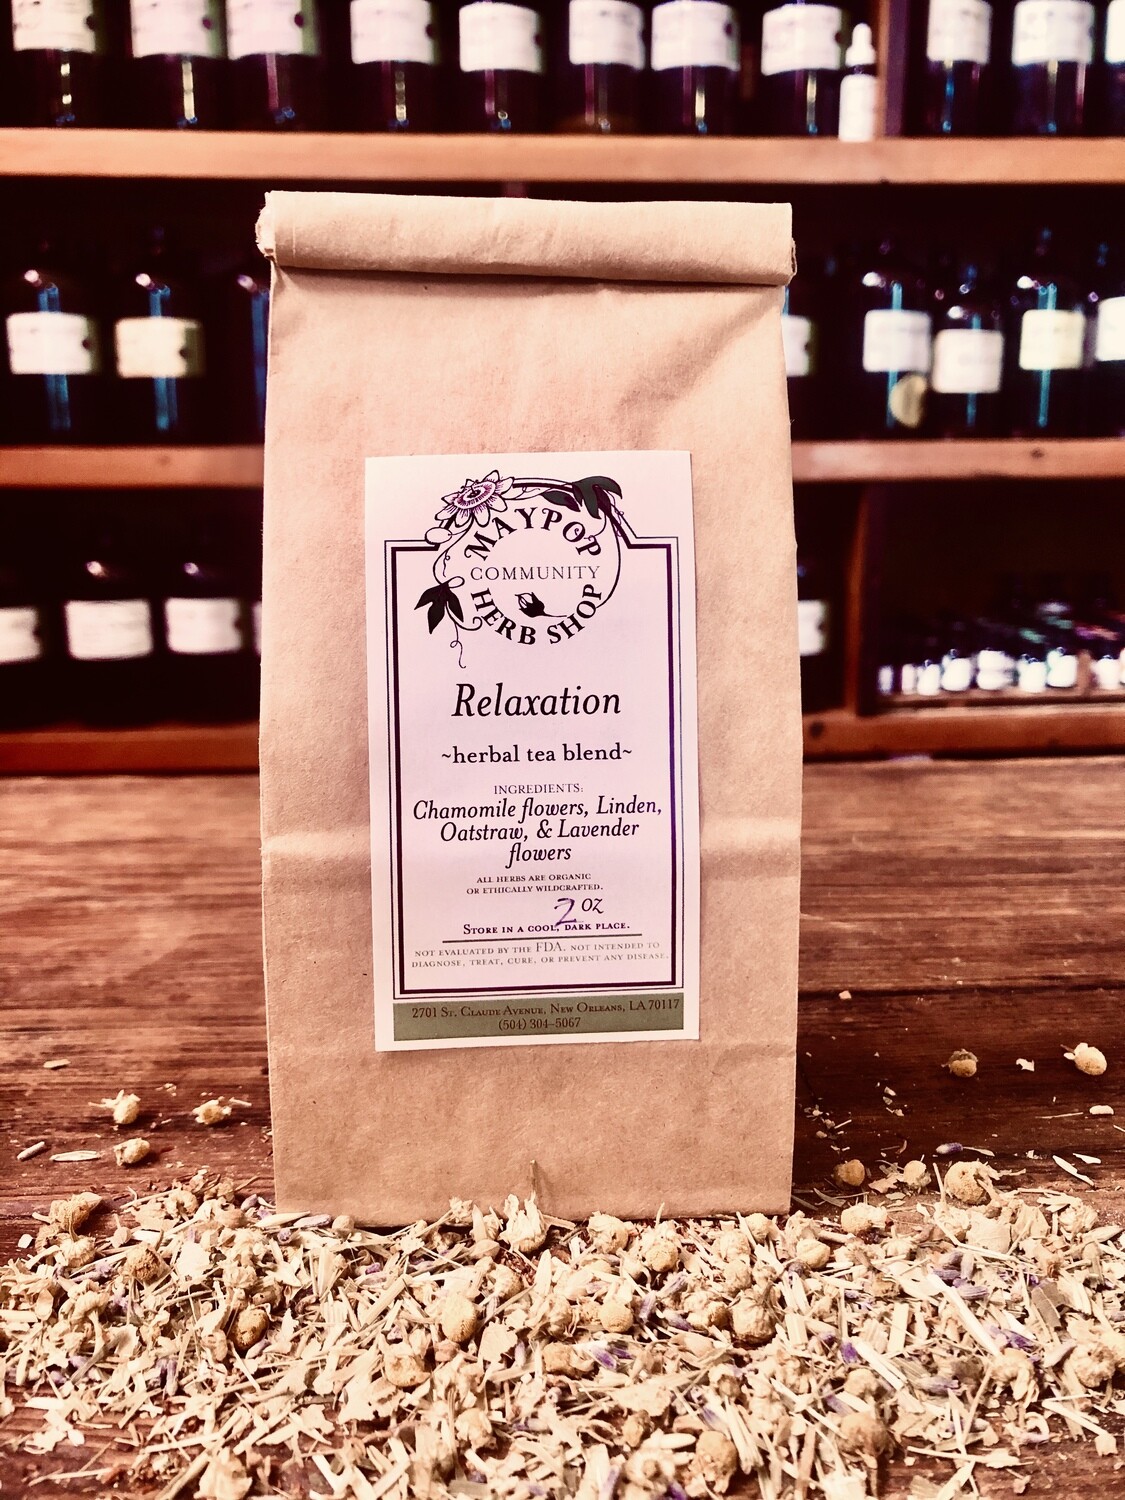 Relaxation Tea by Maypop